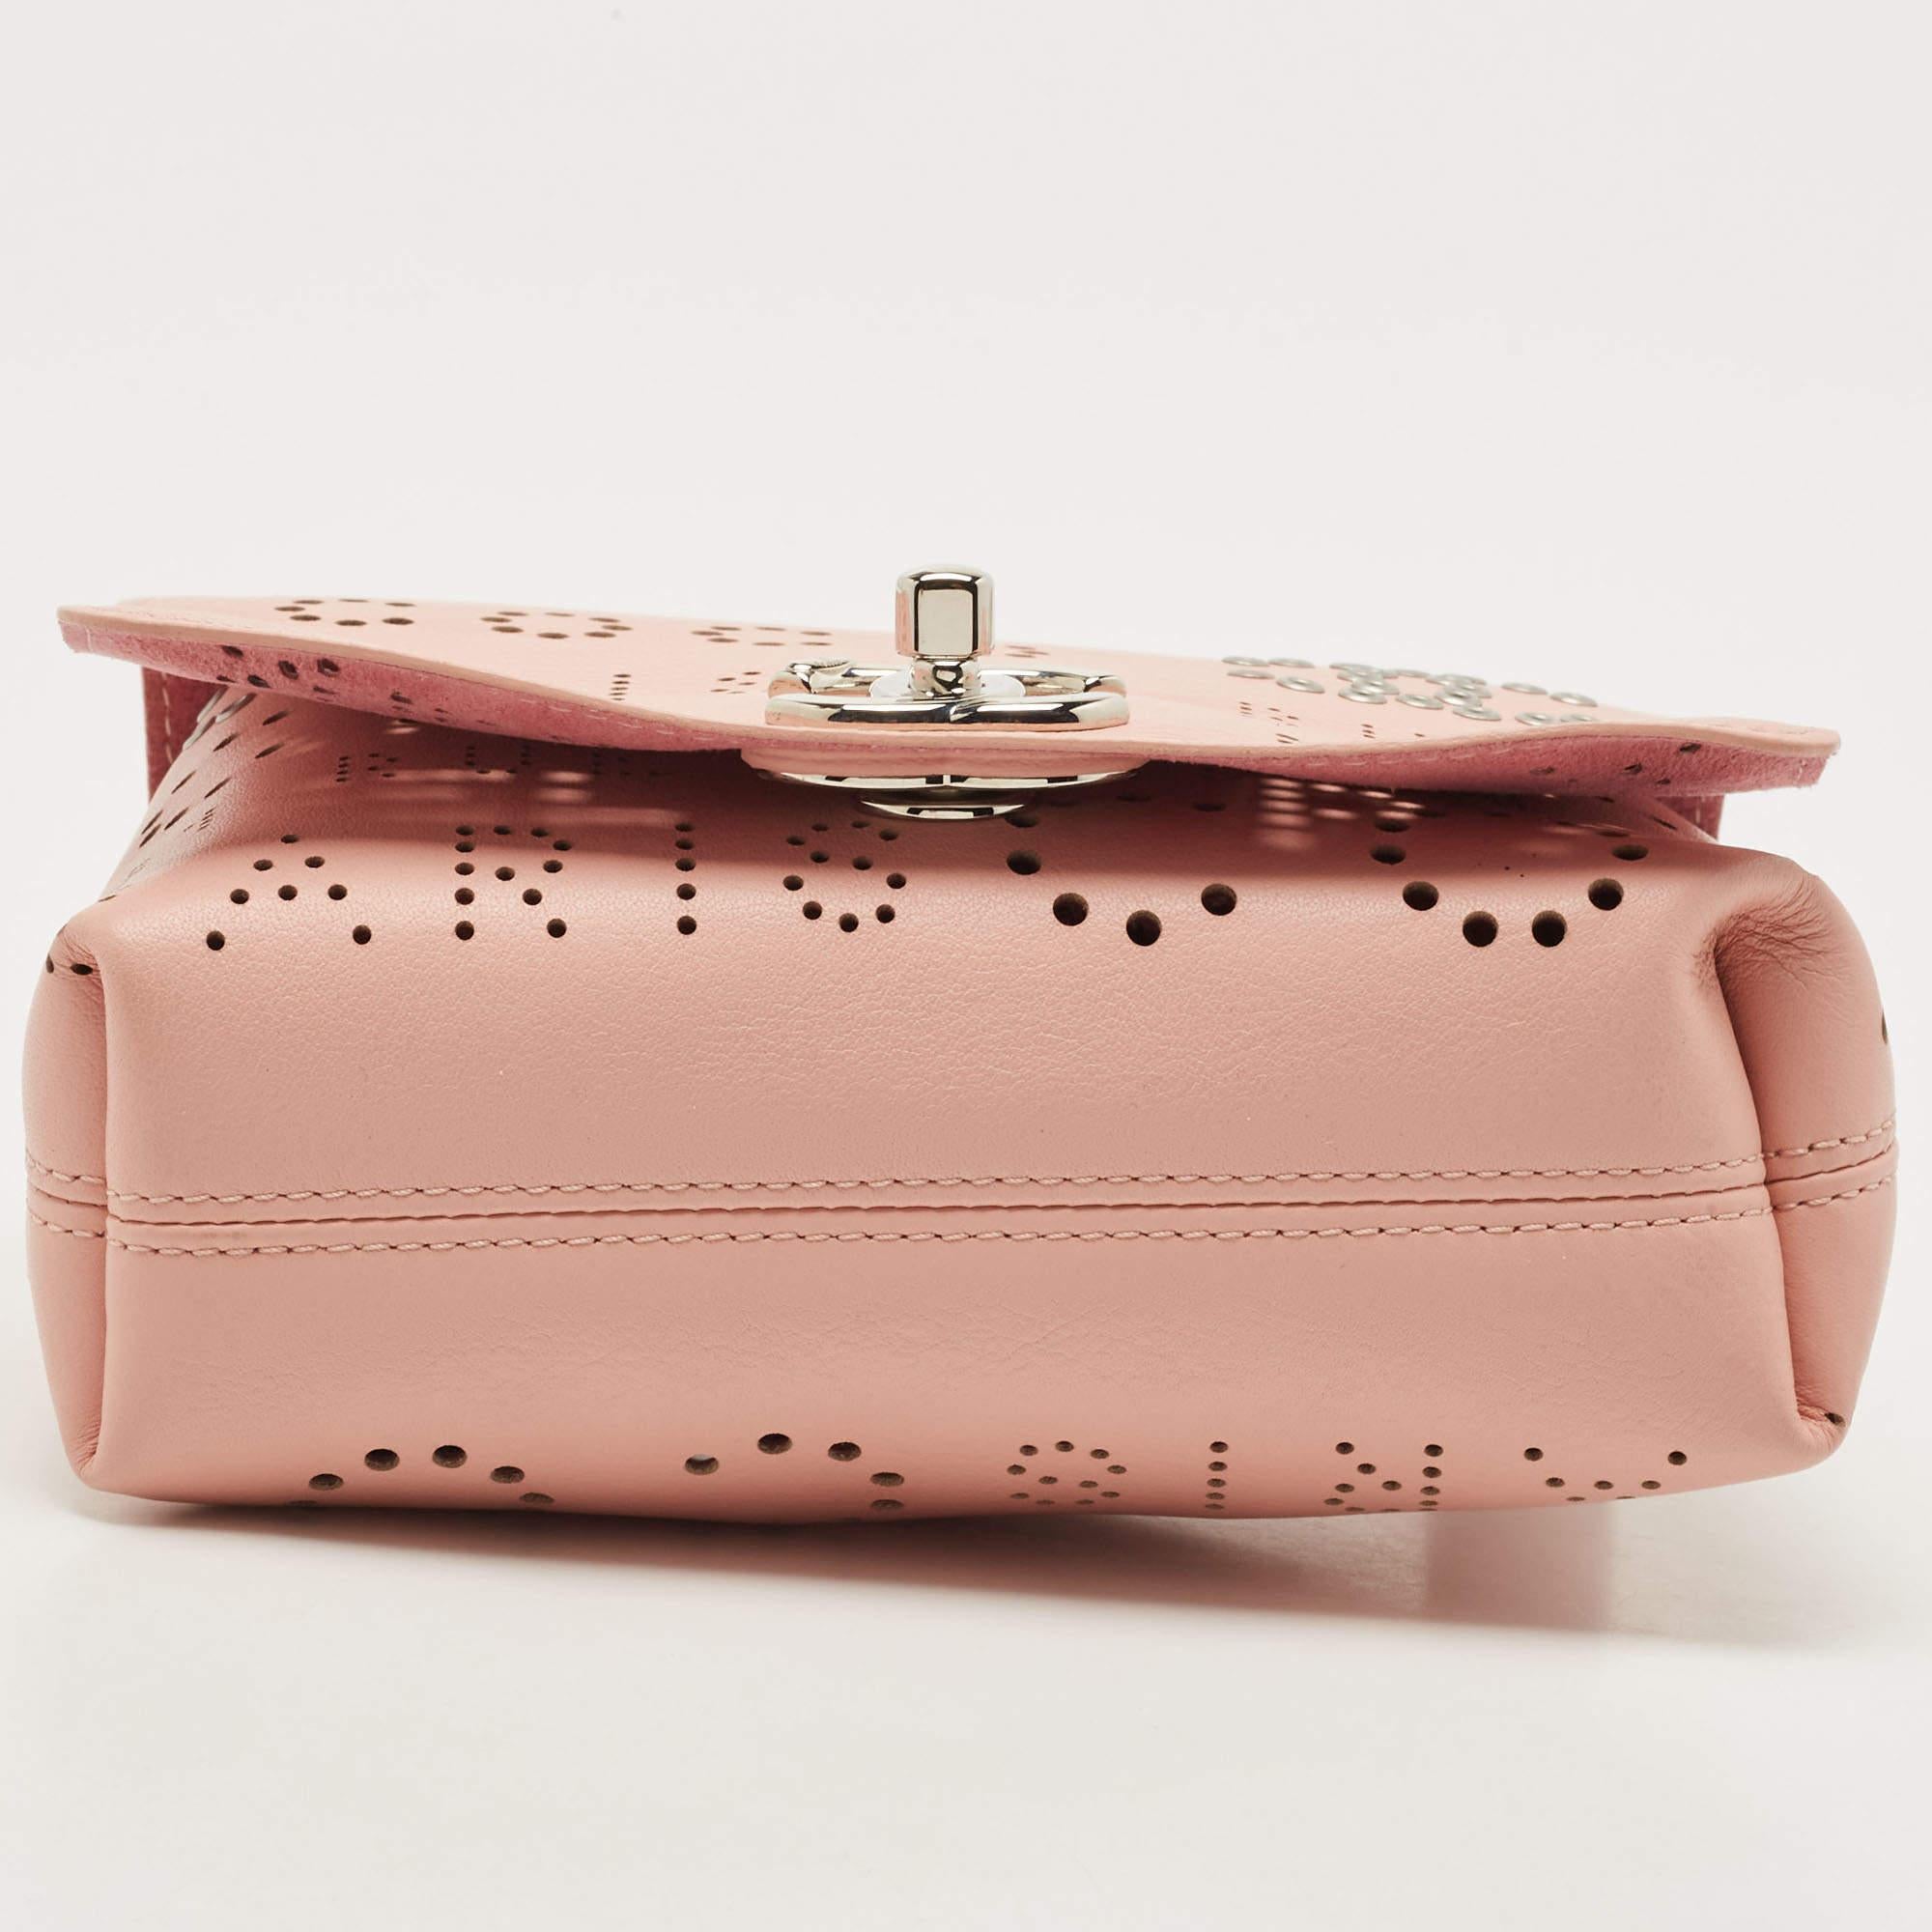 Chanel Pink Leather Eyelet Waist Bag For Sale 1